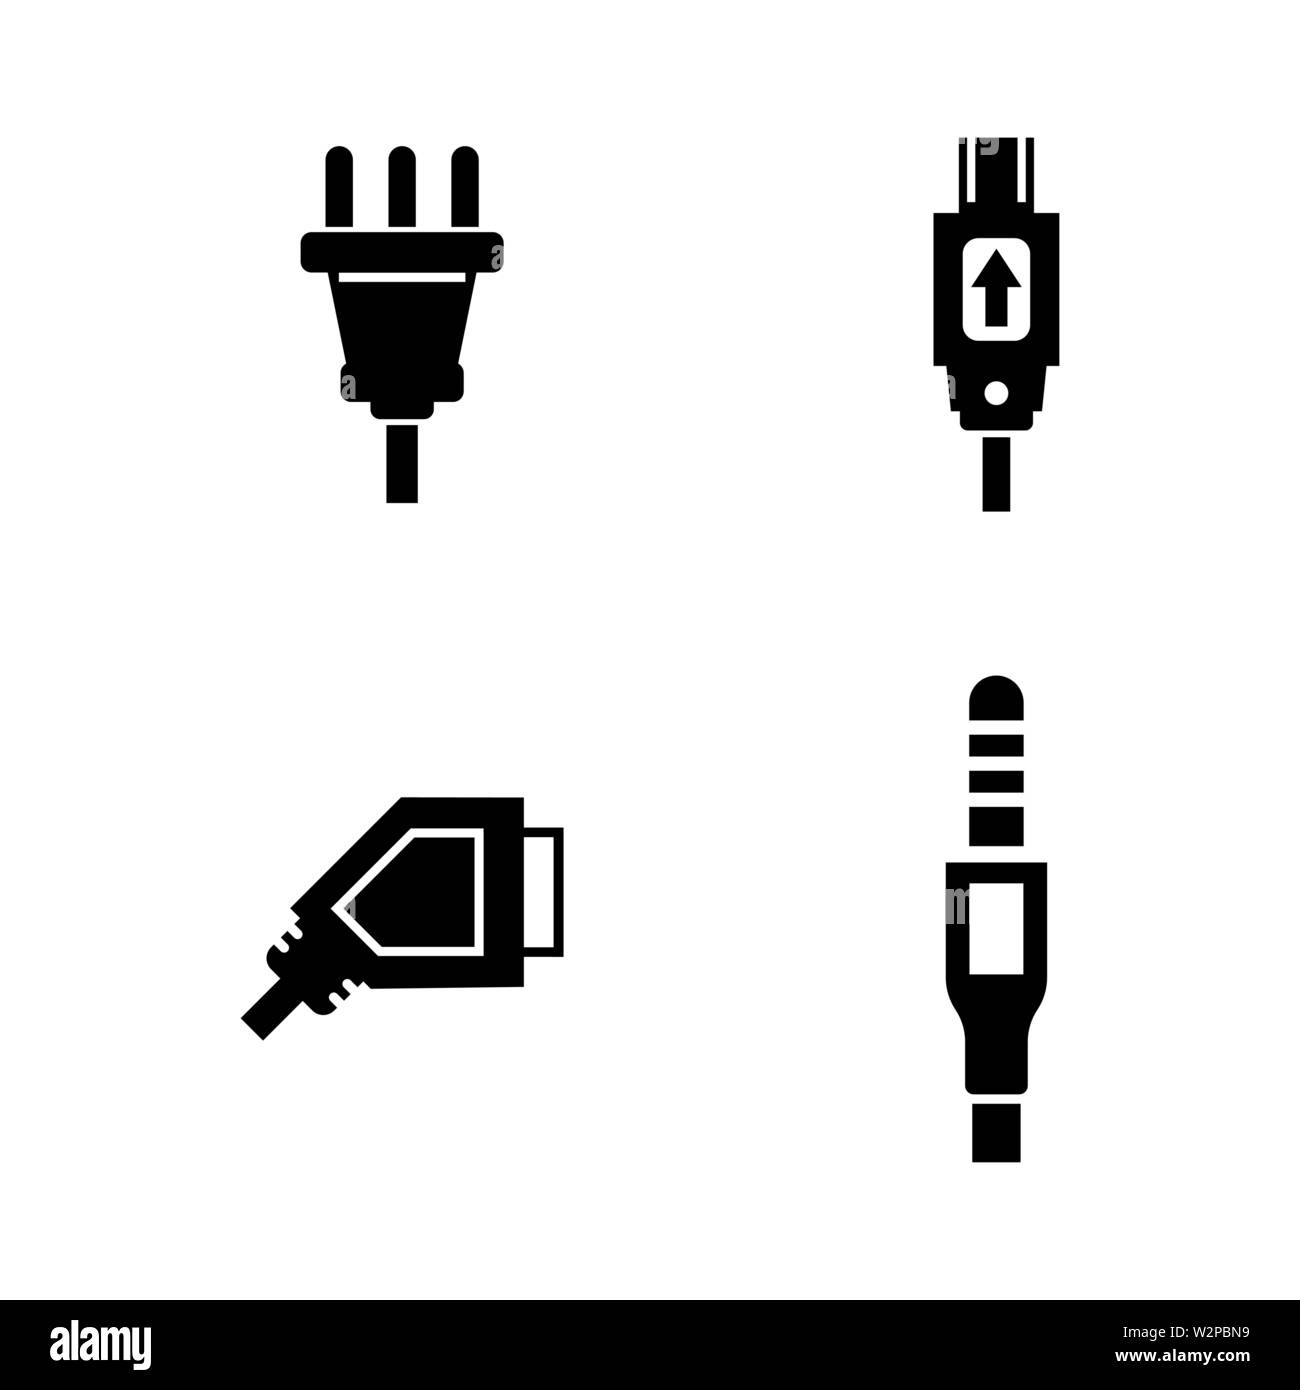 Plug. Simple Related Vector Icons Set for Video, Mobile Apps, Web Sites, Print Projects and Your Design. Black Flat Illustration on White Background. Stock Vector